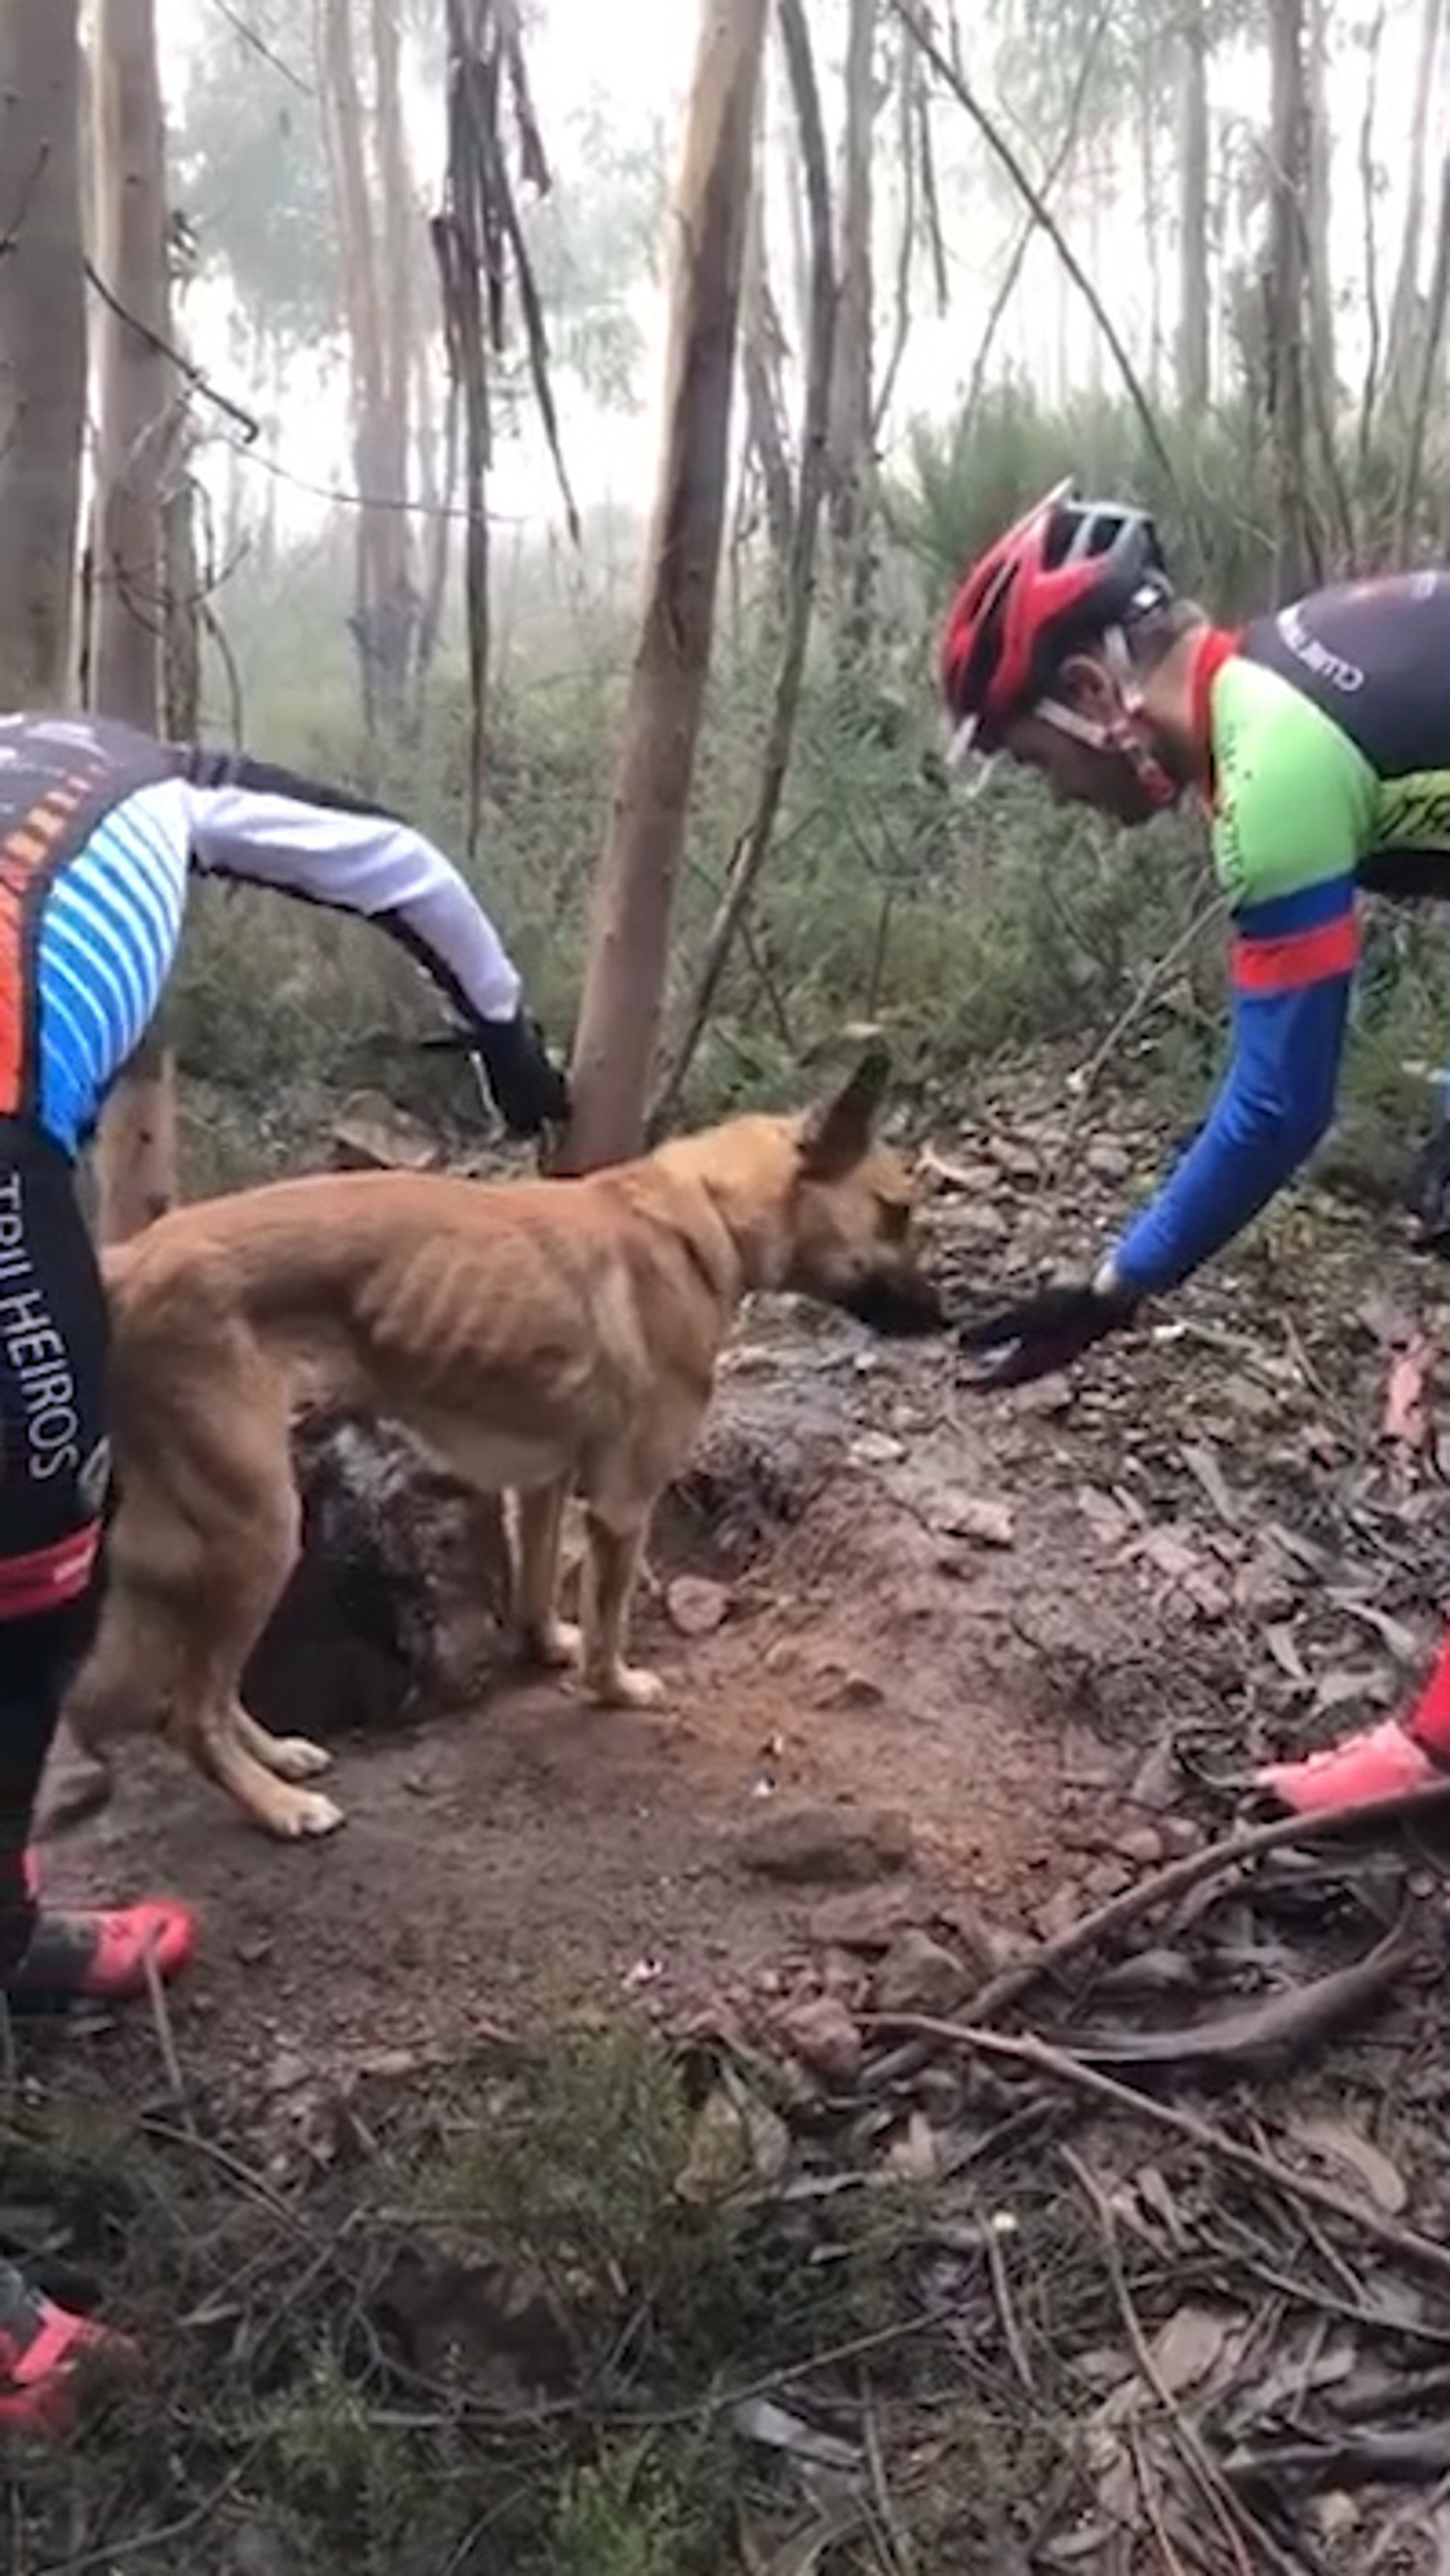 Read more about the article Cyclists Rescue Dog Tied Up And Abandoned In Woods